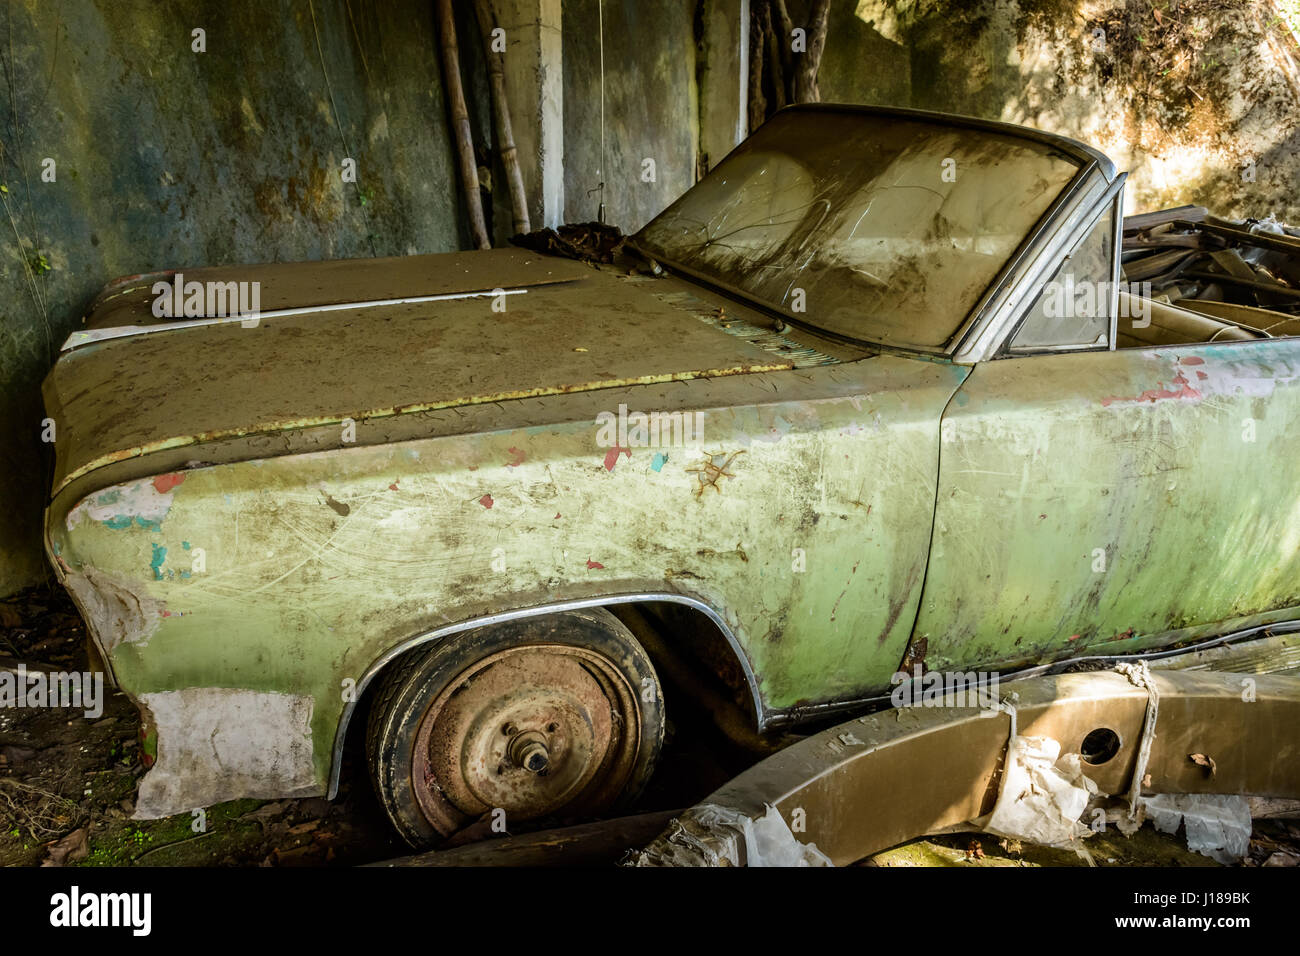 Battered, abandoned, old, green car Stock Photo